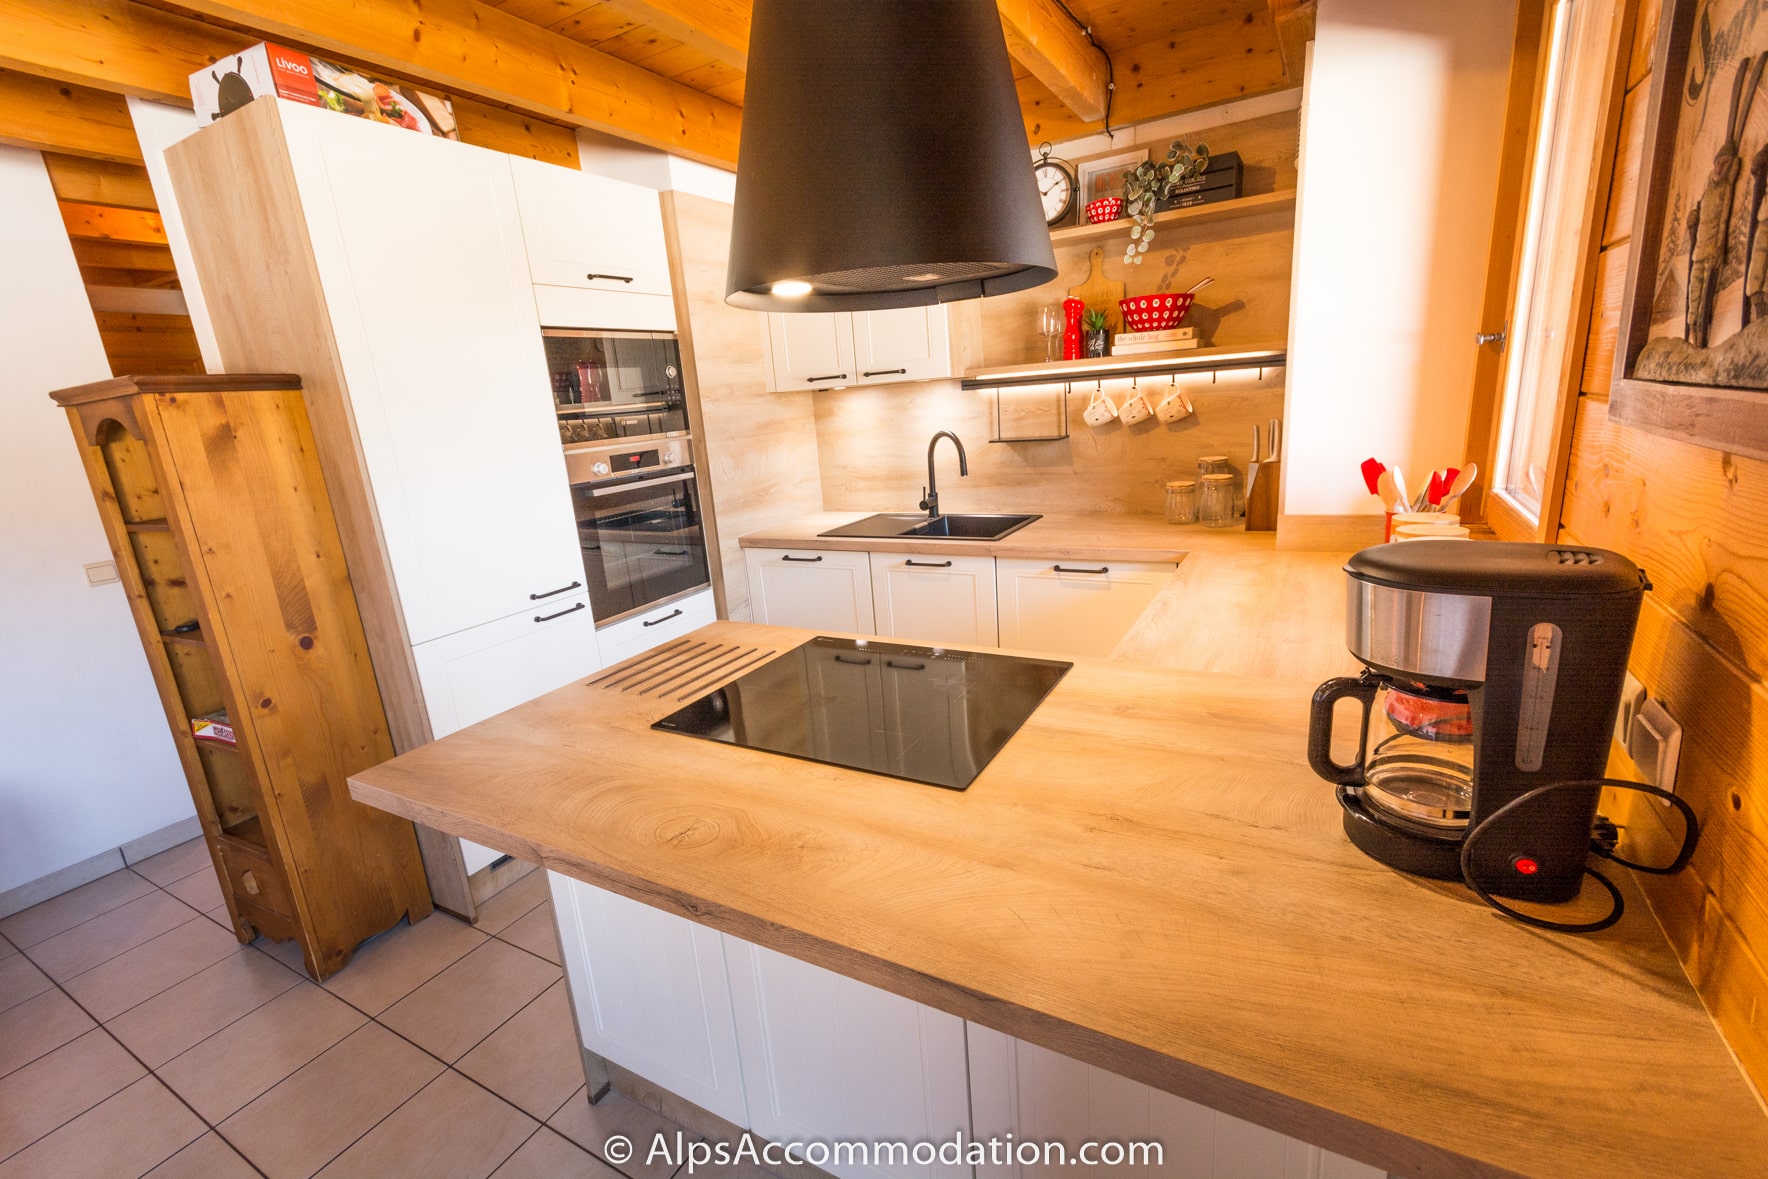 Pas Au Loup A10 Samoens - Spacious kitchen which contains everything you could need